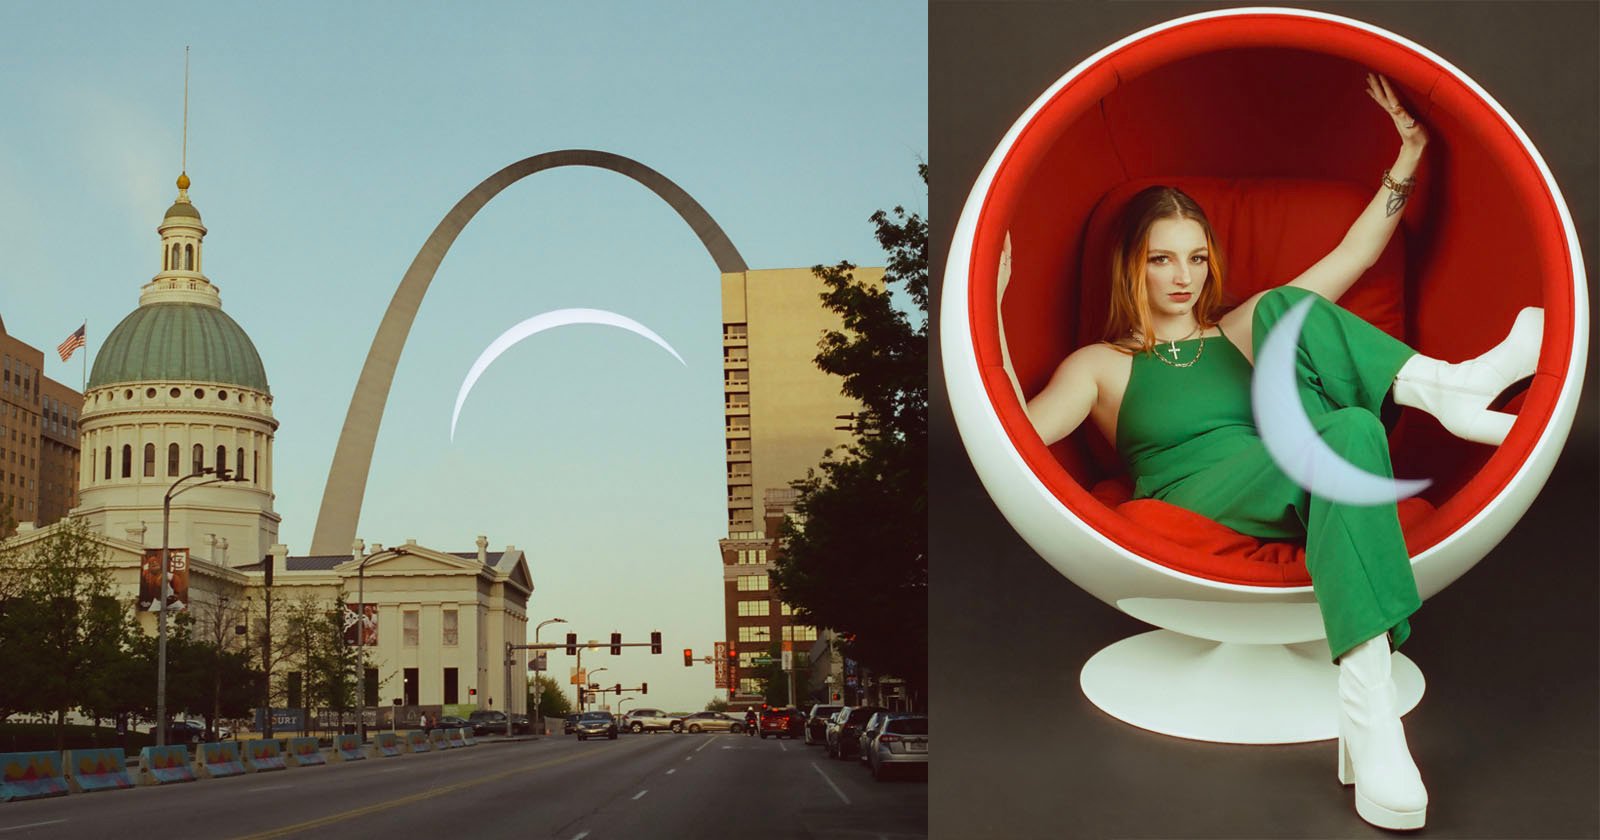 A composite image featuring a cityscape with a prominent arch and dome on the left, and a woman in a green outfit lounging inside a spherical, futuristic chair on the right.